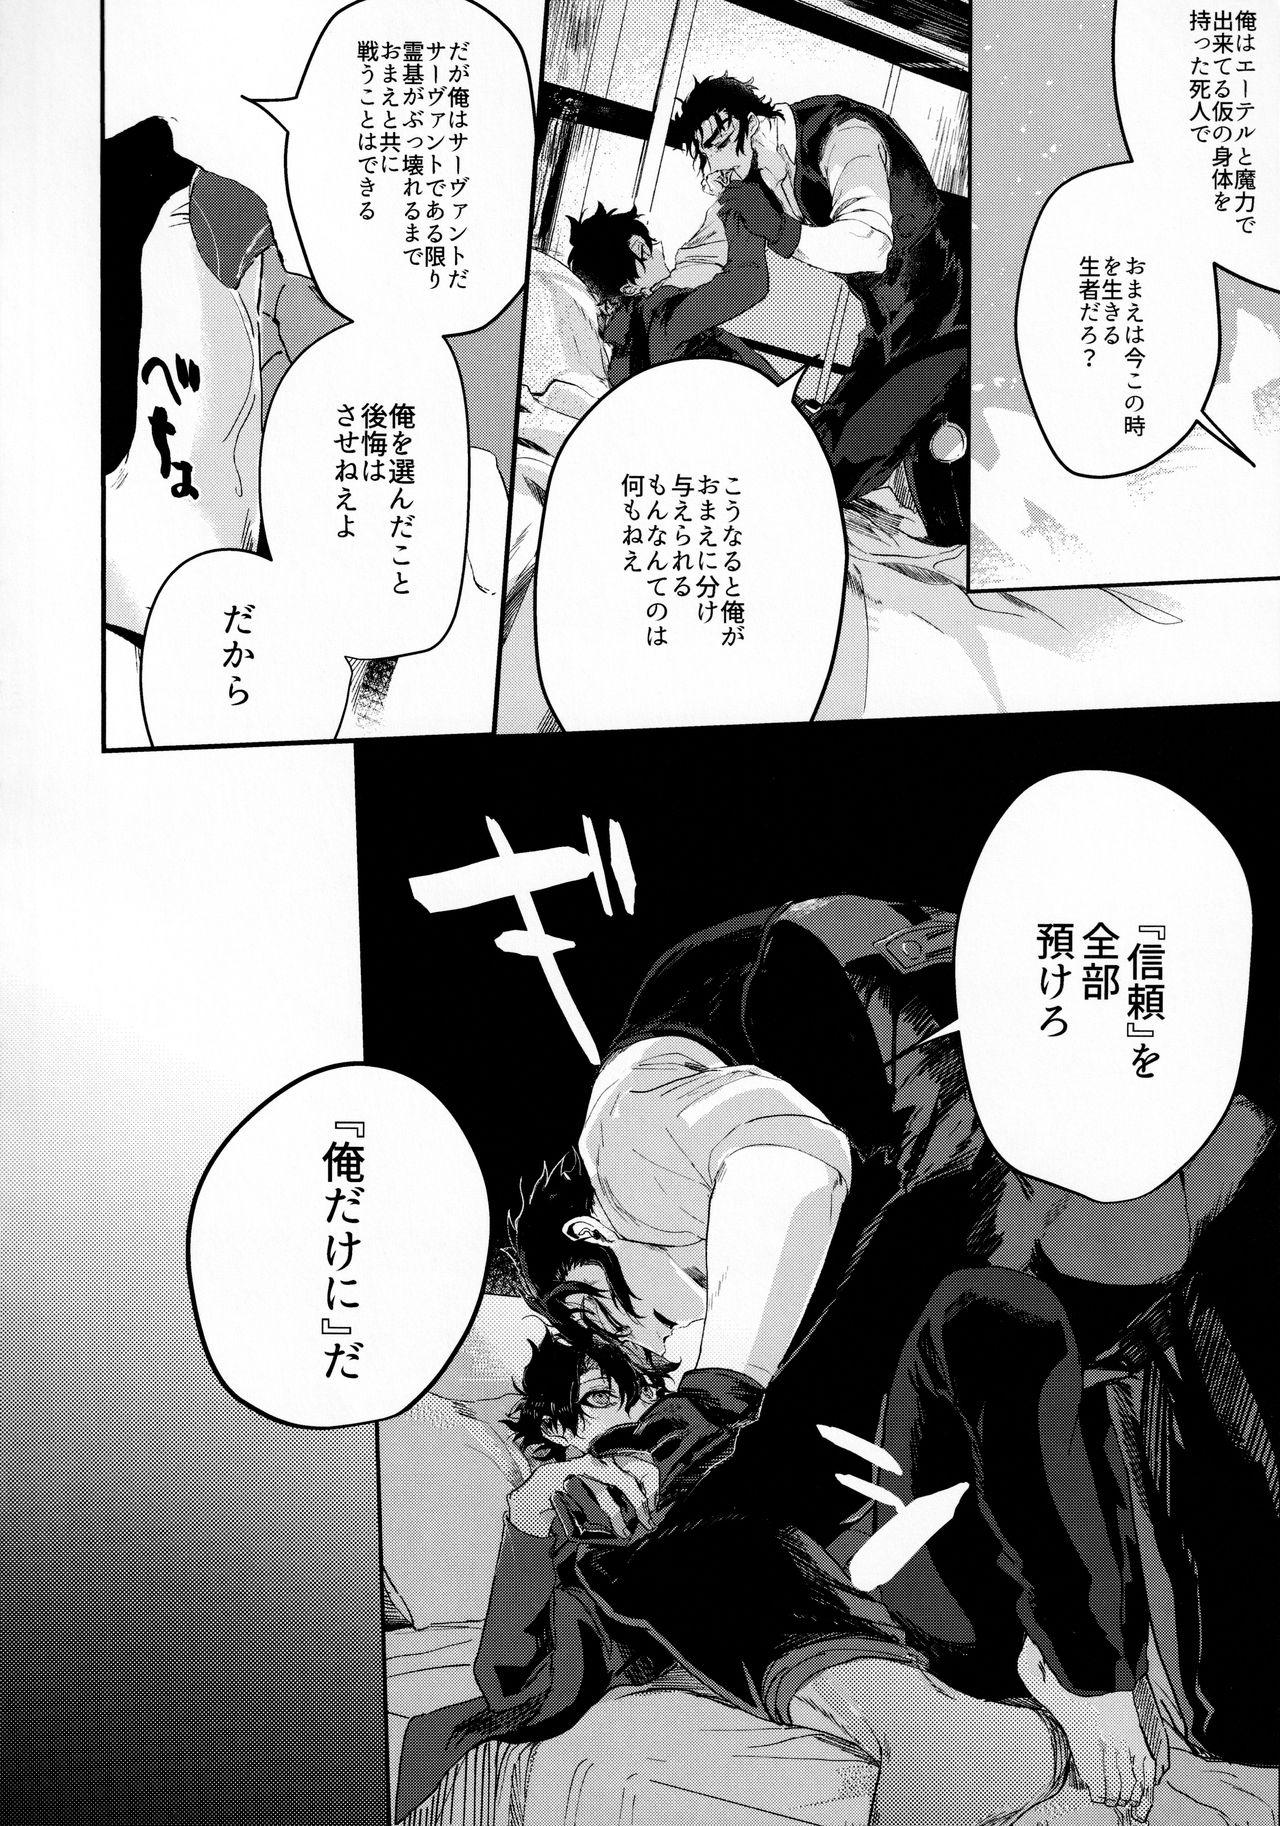 Eng Sub 耽溺と熱 - Fate grand order Cumshot - Page 11